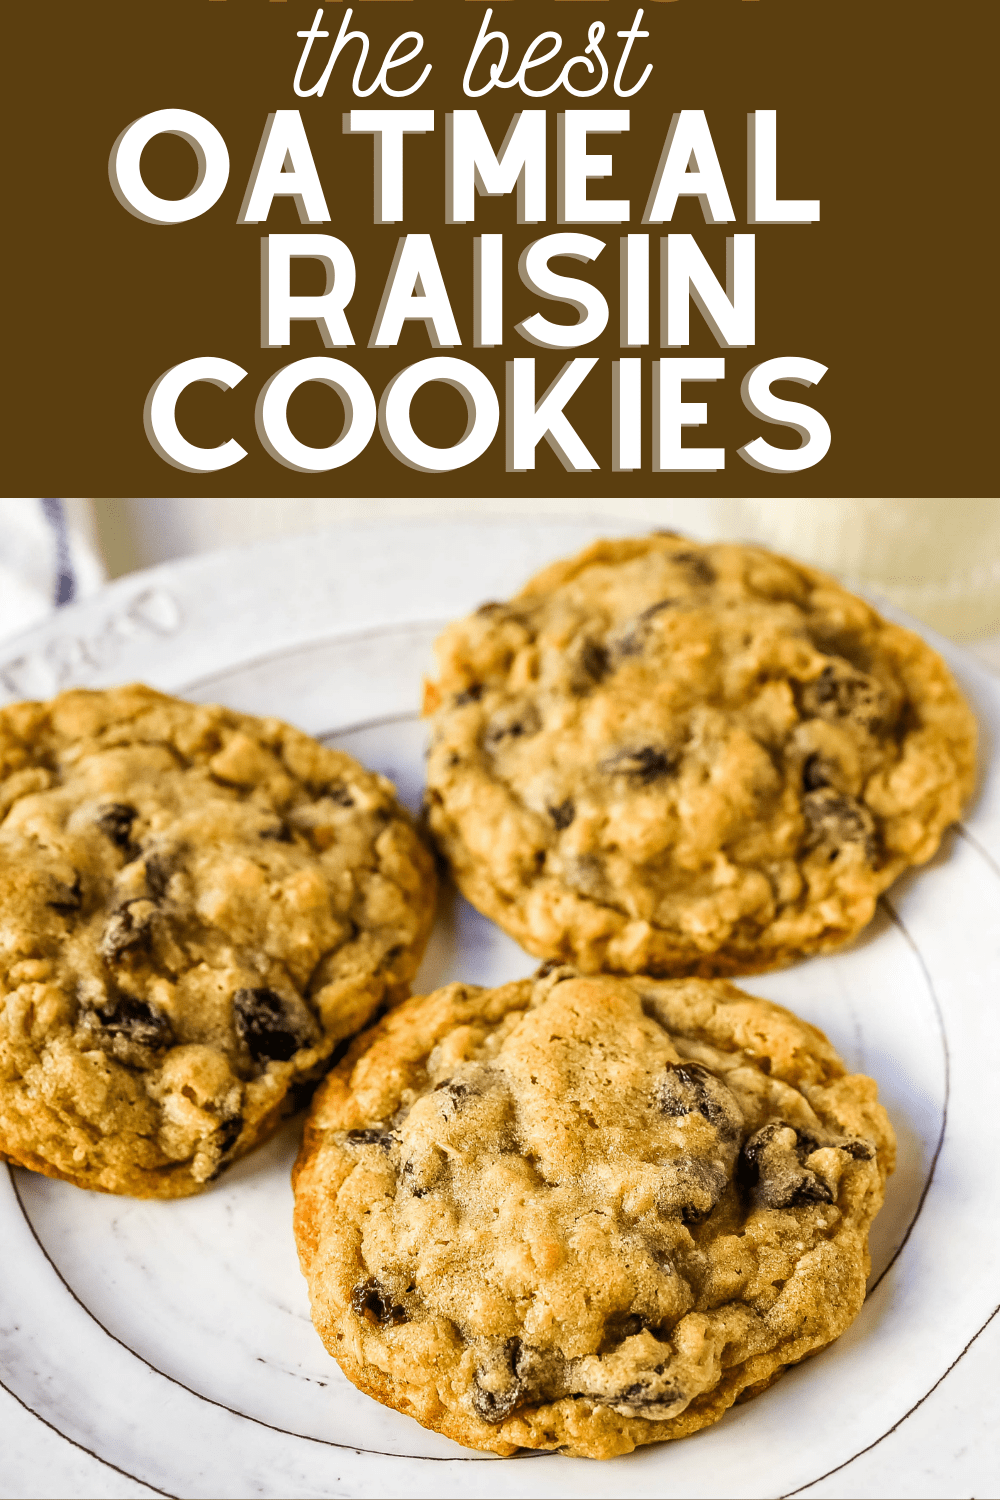 The Best Oatmeal Raisin Cookies These soft, chewy oatmeal cookies with plump raisins are the best oatmeal cookie recipe on the planet. www.modernhoney.com #oatmealraisincookies #oatmealcookies #oatmealraisincookie #cookies 